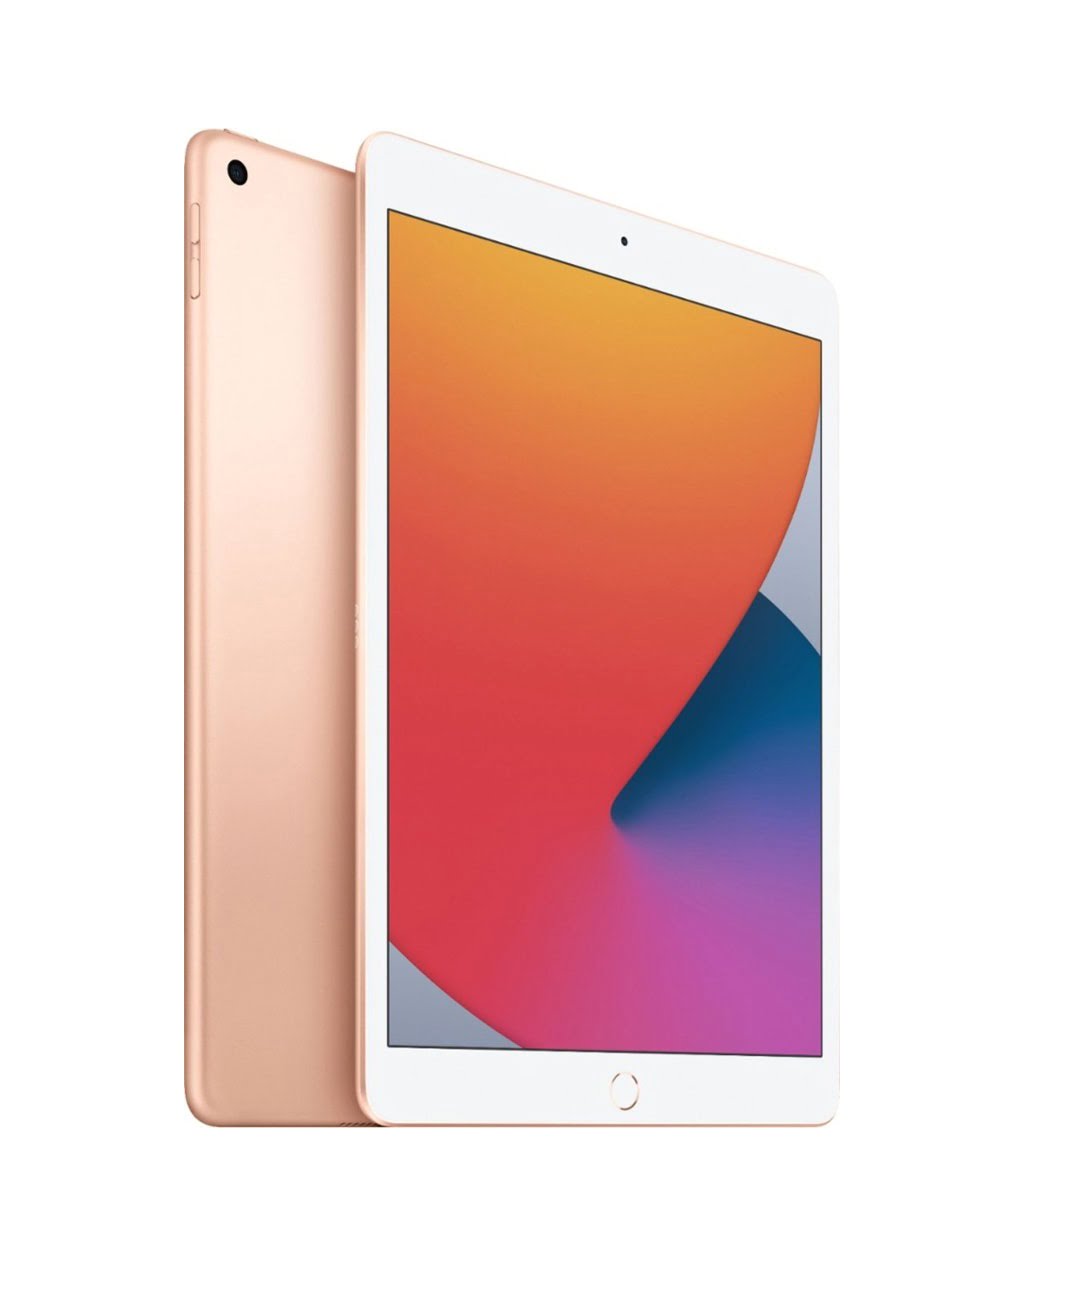 Apple &Amp;Lt;H1&Amp;Gt;Apple - 10.2-Inch Ipad - Latest Model - (8Th Generation) With Wi-Fi - 32Gb - Gold&Amp;Lt;/H1&Amp;Gt; &Amp;Lt;Div Class=&Amp;Quot;Product-Description&Amp;Quot;&Amp;Gt;The New Ipad. It'S Your Digital Notebook, Mobile Office, Photo Studio, Game Console, And Personal Cinema. With The A12 Bionic Chip That Can Easily Power Essential Apps And Immersive Games. So You Can Edit A Document While Researching On The Web And Making A Facetime Call To A Colleague At The Same Time. Apple Pencil Makes Note-Taking With Ipad A Breeze.¹ Attach A Full-Size Smart Keyboard For Comfortable Typing.¹ And Go Further With Wi-Fi And Gigabit-Class Lte² And All-Day Battery Life.³&Amp;Lt;/Div&Amp;Gt; Apple - 10.2-Inch Ipad - Latest Model - (8Th Generation) With Wi-Fi - 32Gb - Gold